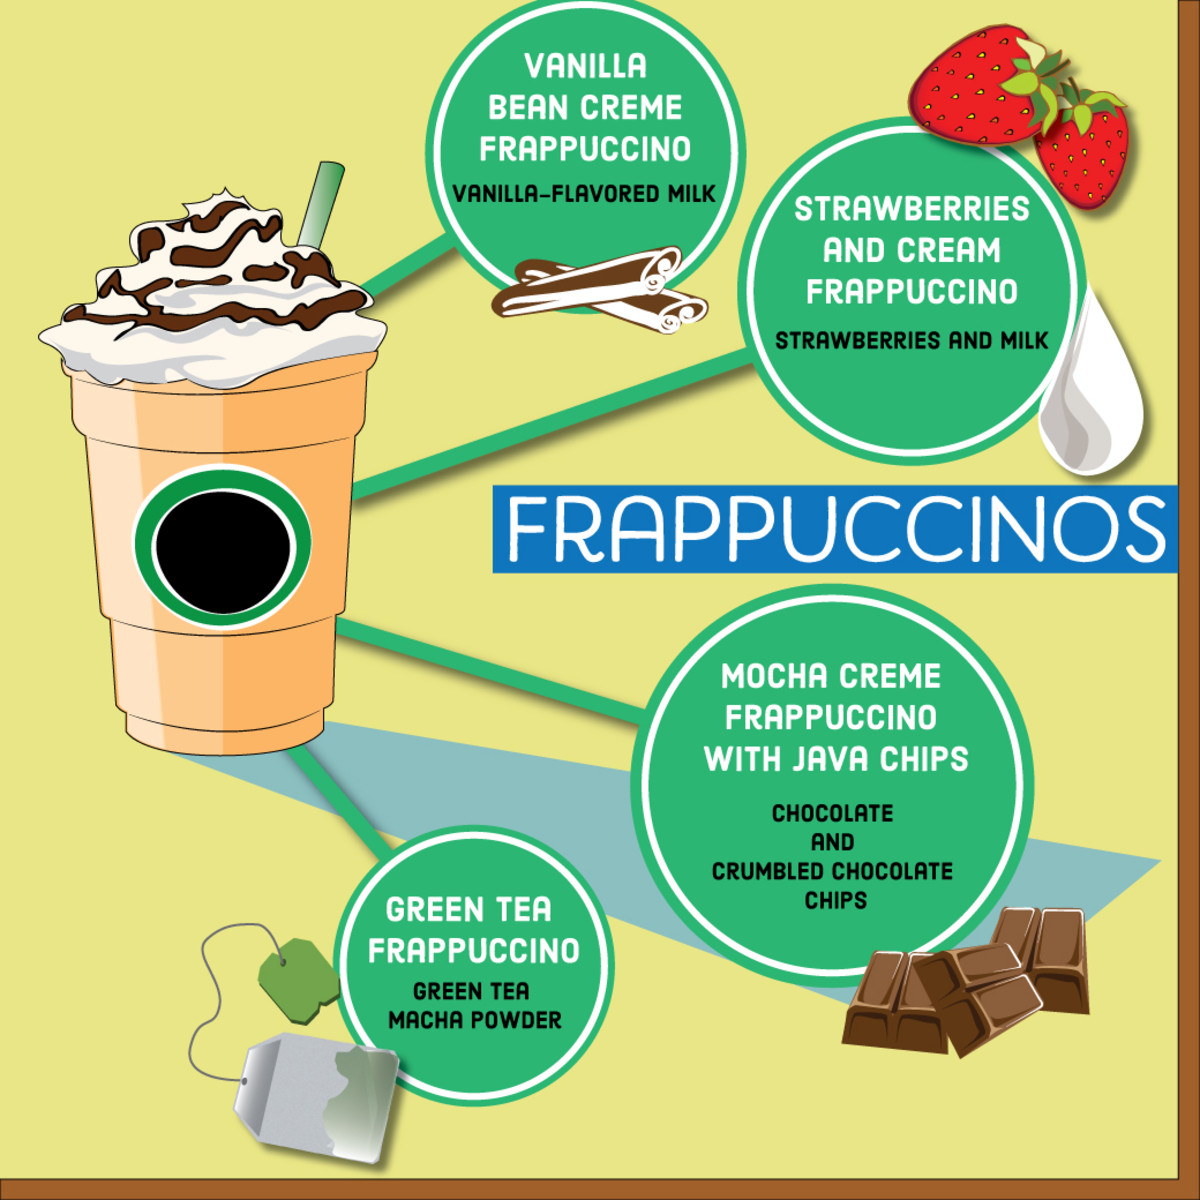 how many calories in a starbucks green tea frappuccino